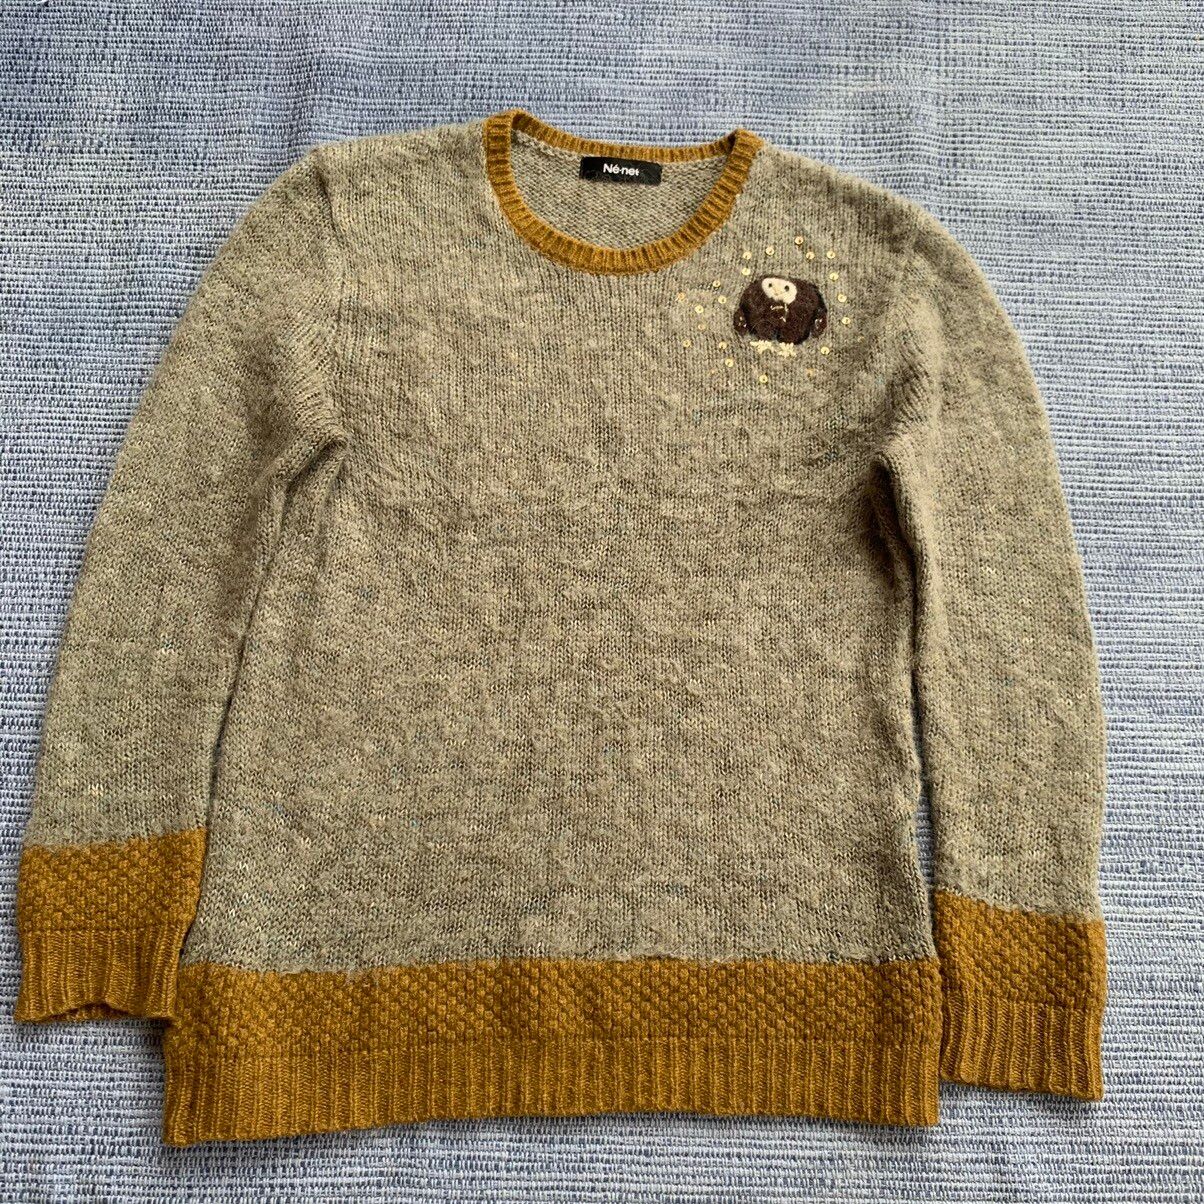 Issey Miyake Owl jumper Size US XS / EU 42 / 0 - 1 Preview